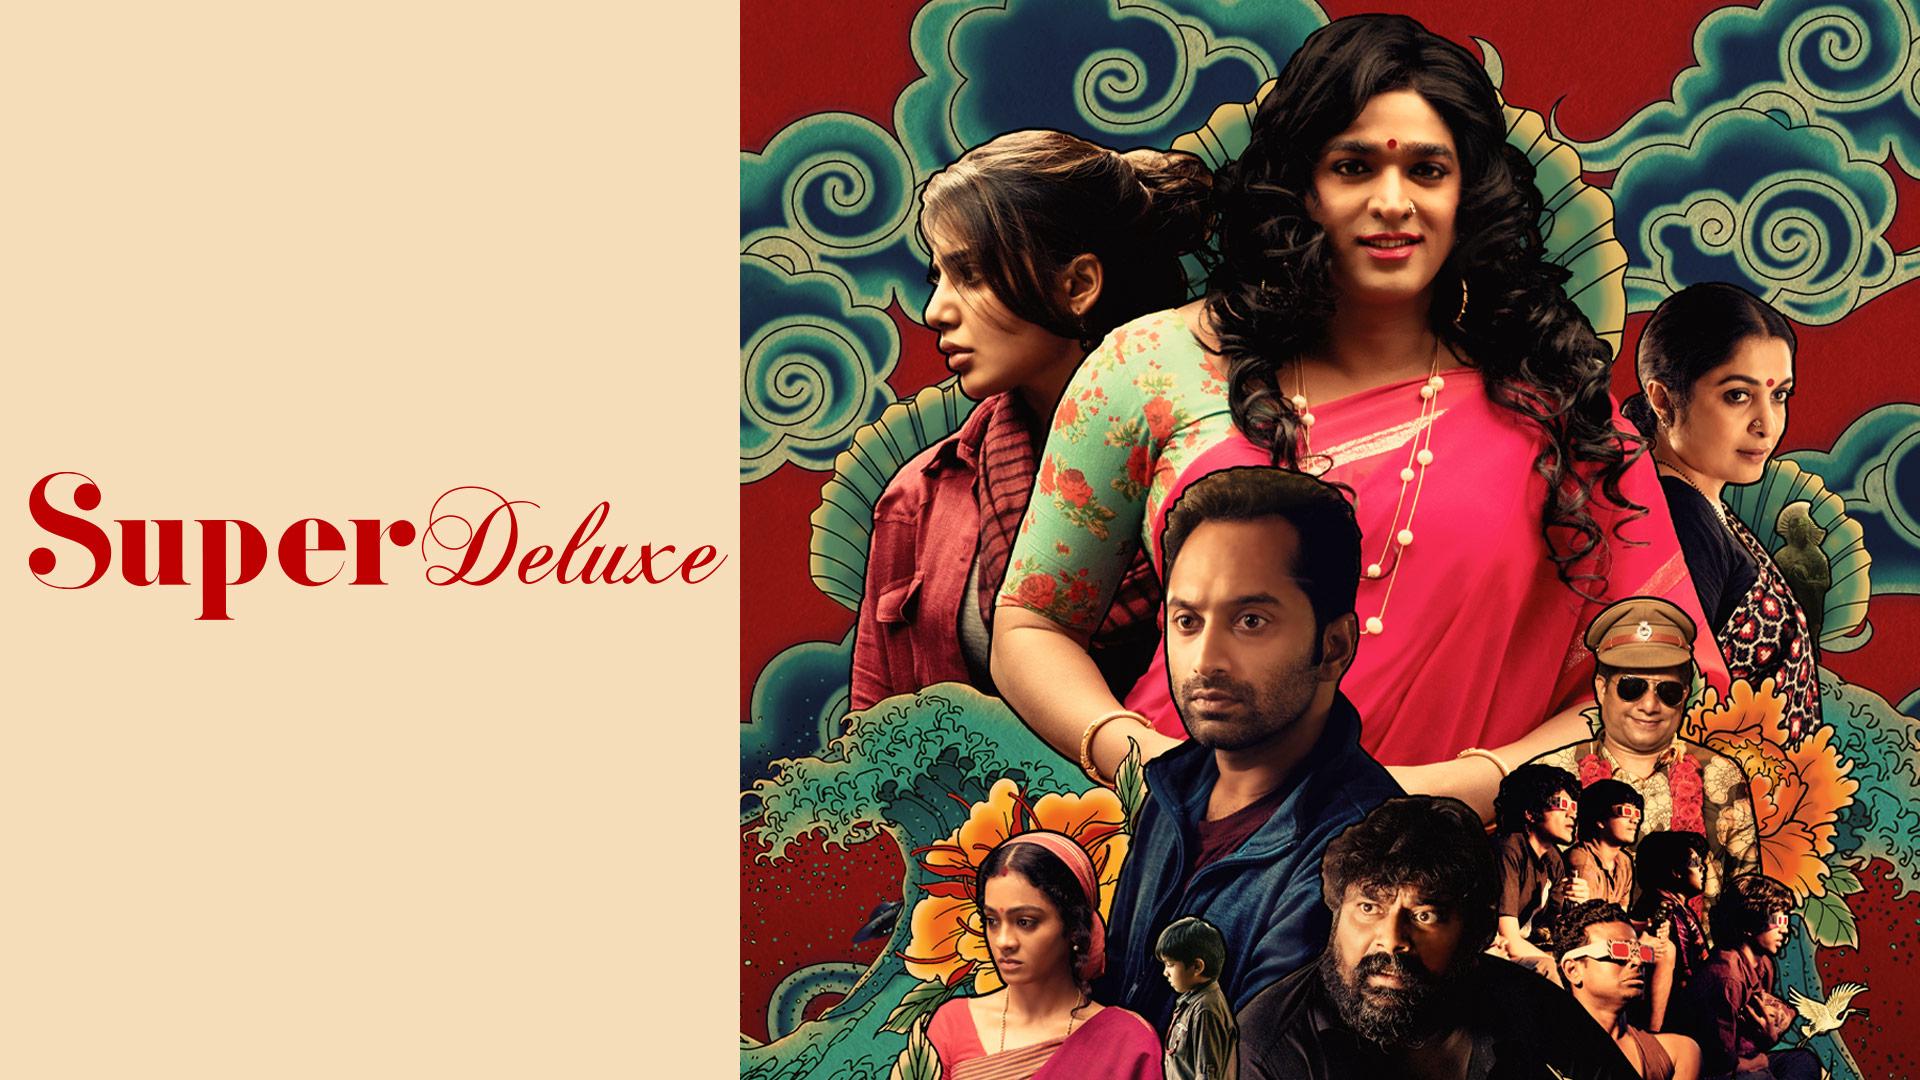 Watch Super Deluxe Full Movie Online in HD Quality | Download Now